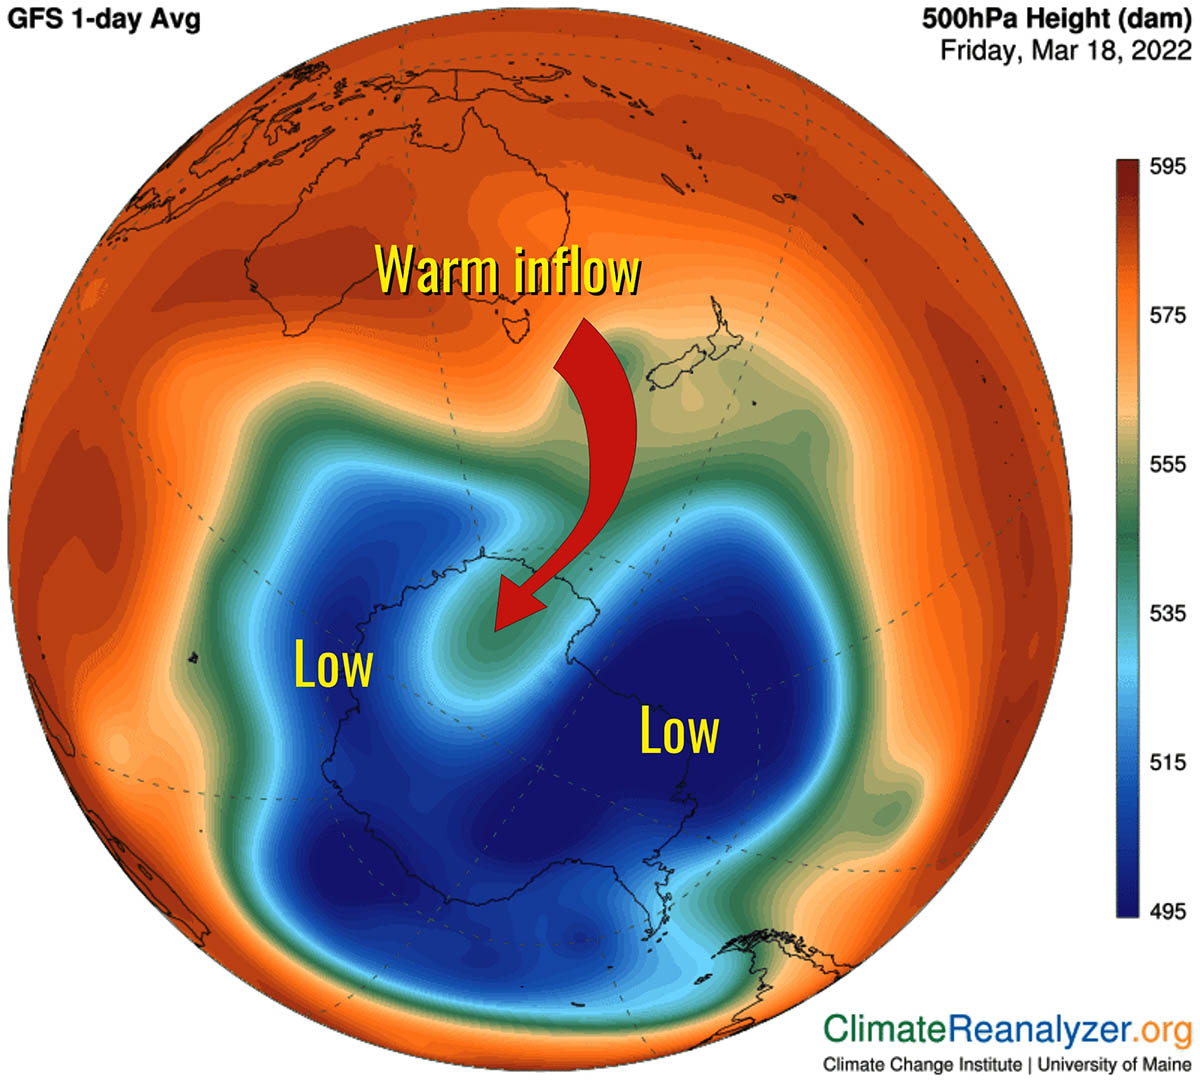 powerful-heat-wave-affecting-antarctic-continent-unprecedented-temperatures-40-degrees-above-average-500hpa